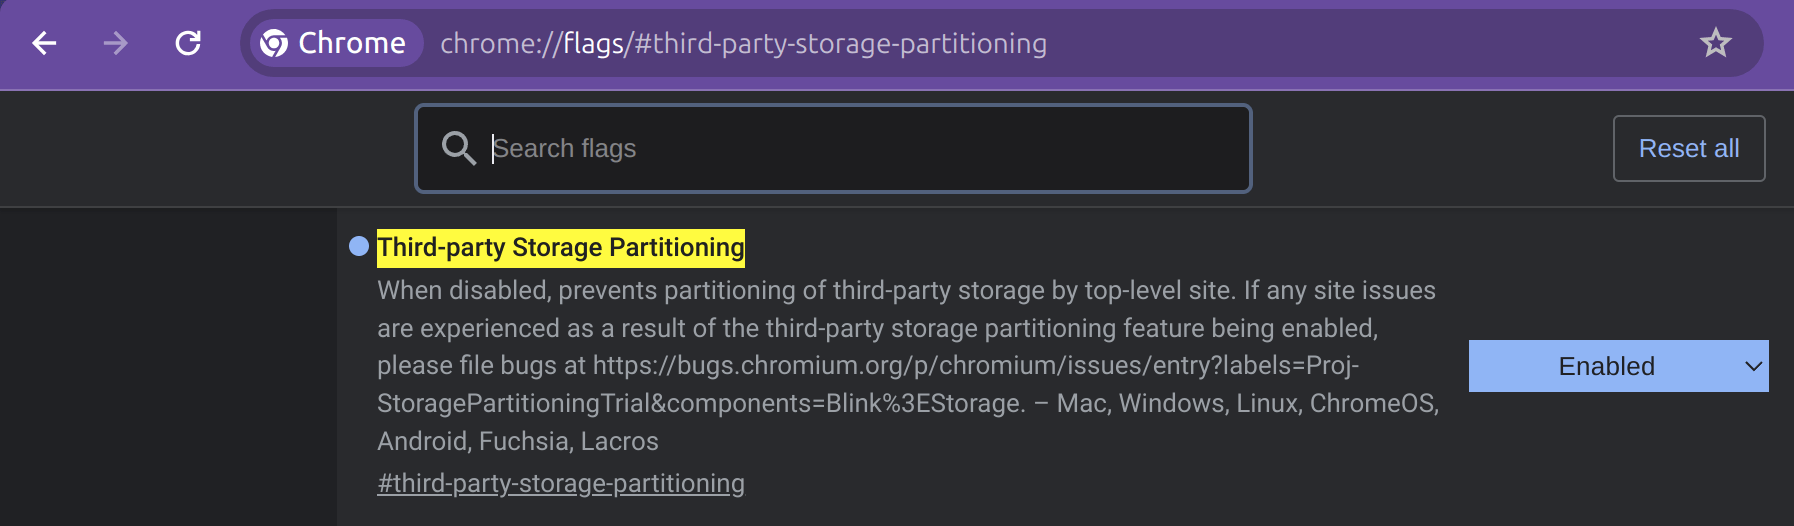 Chrome flags showing the third-party Storage Partitioning option enabled.